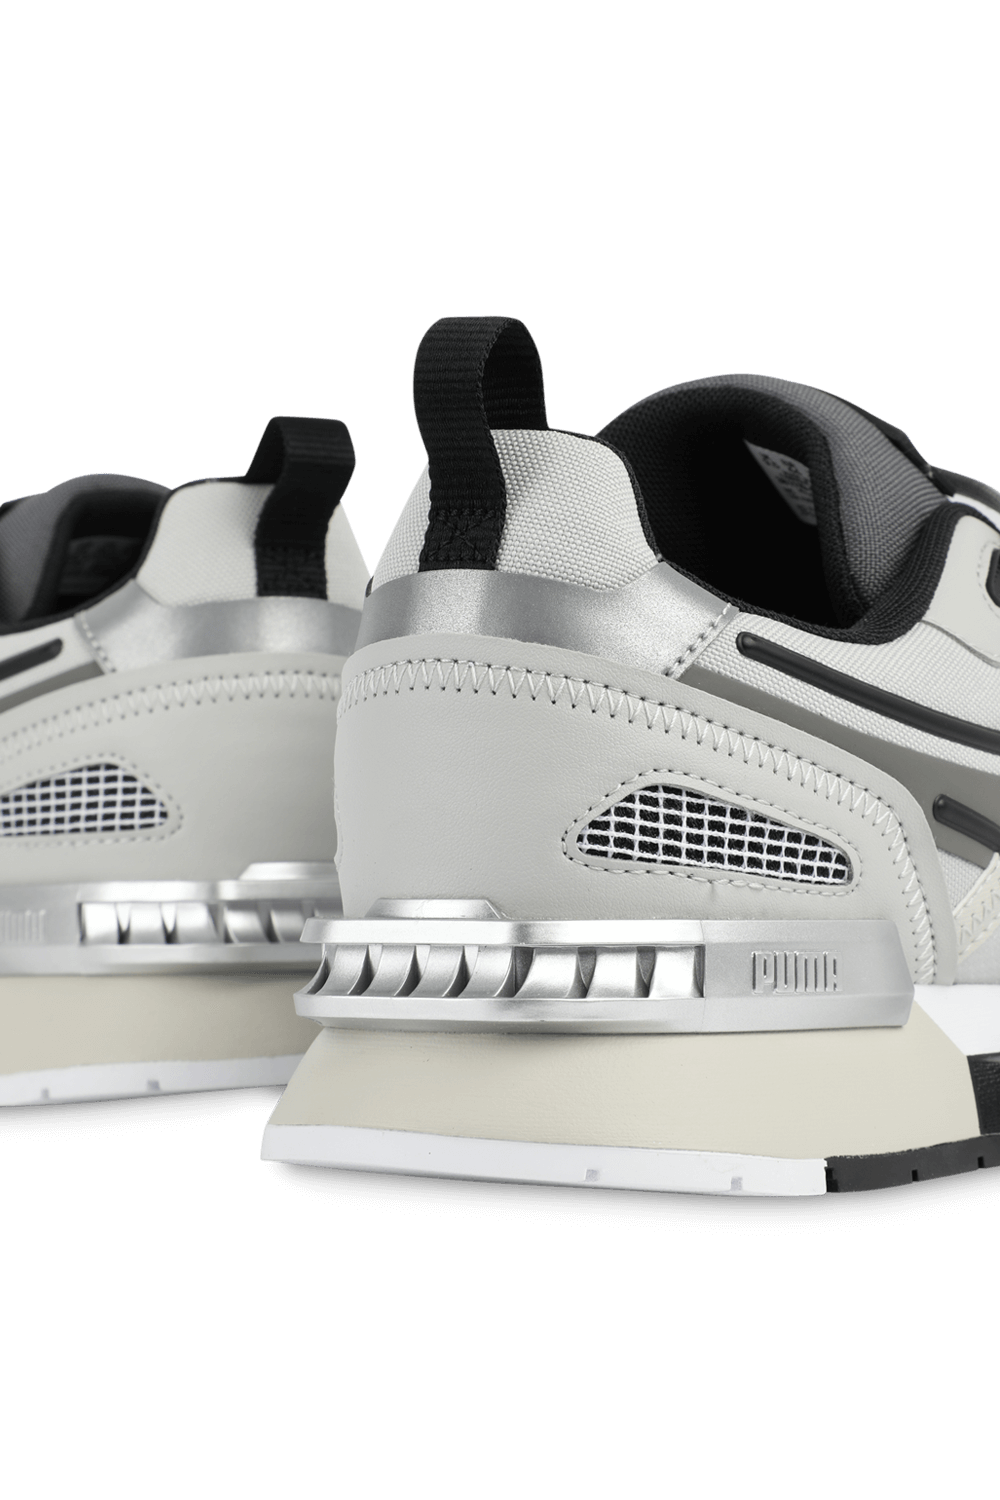 Mirage Tech Core Sneakers in Grey and Black PUMA